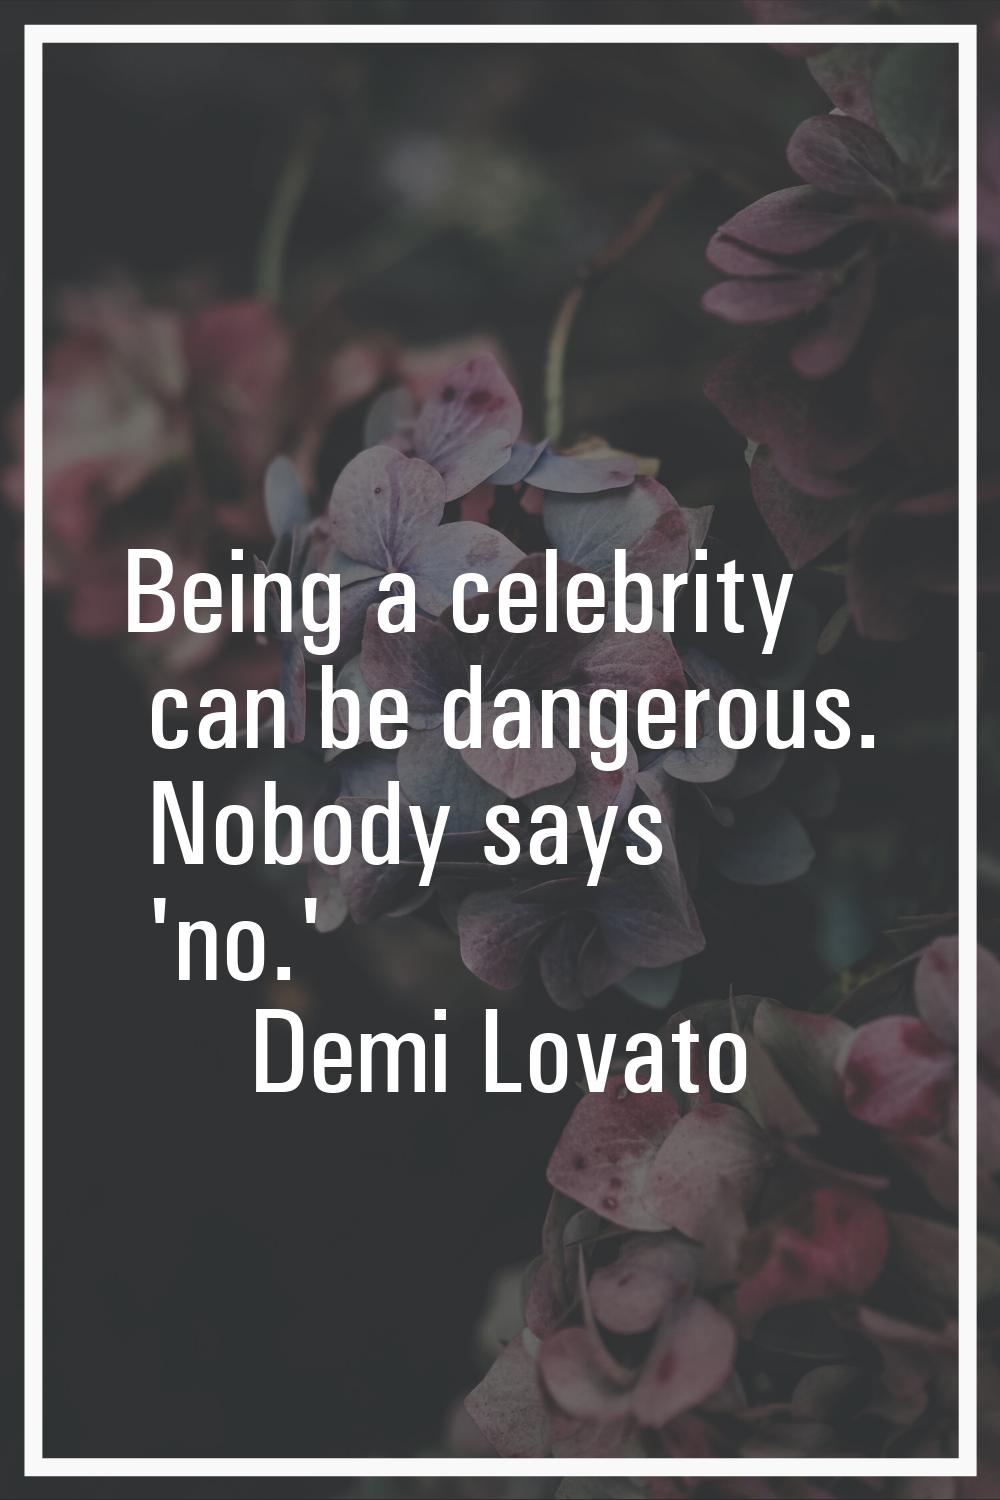 Being a celebrity can be dangerous. Nobody says 'no.'